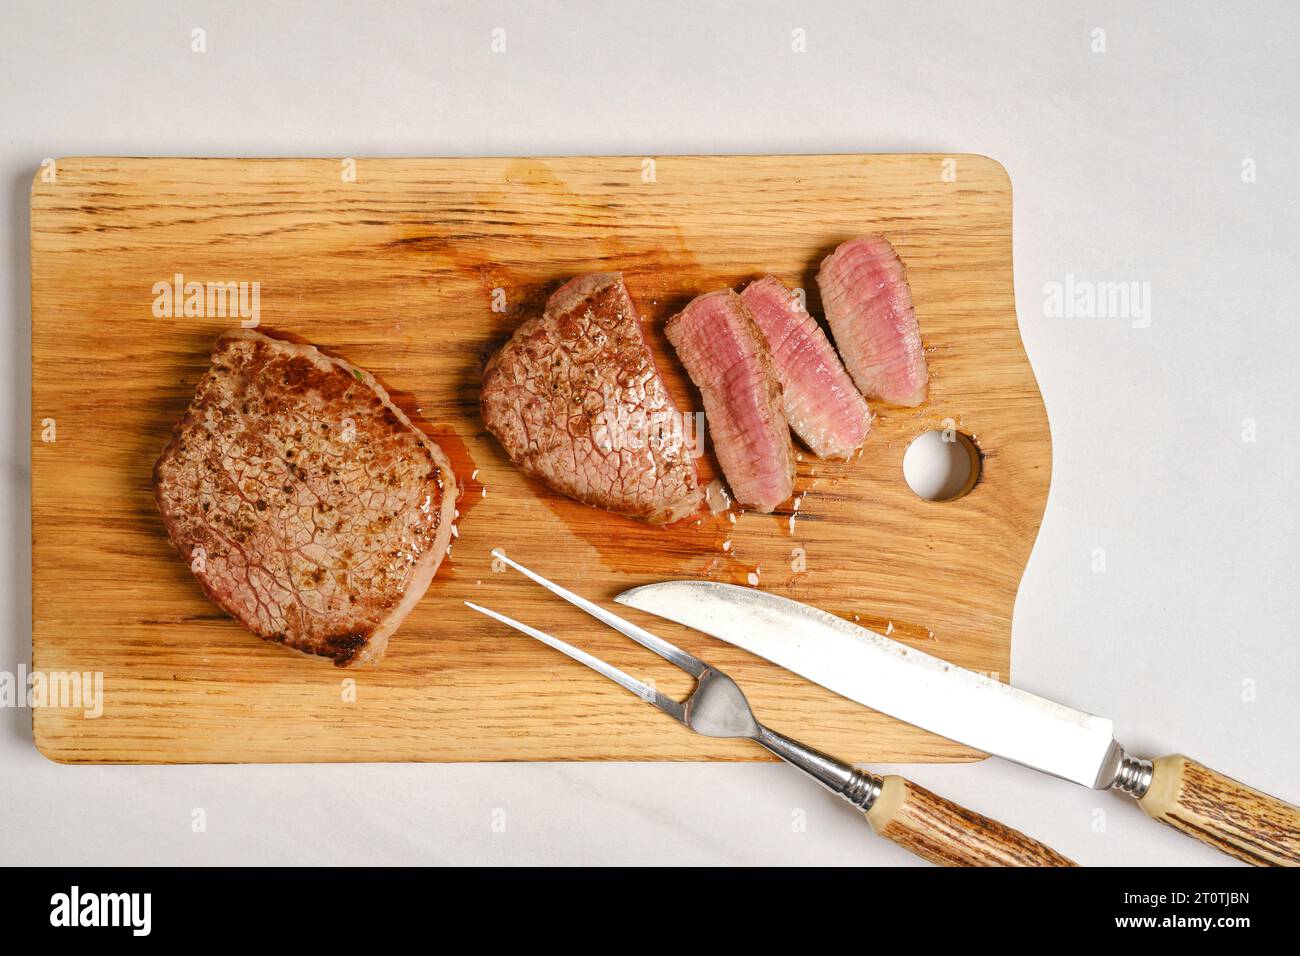 Top view of juicy beef steak medium rare on wooden cutting board cut on slices Stock Photo